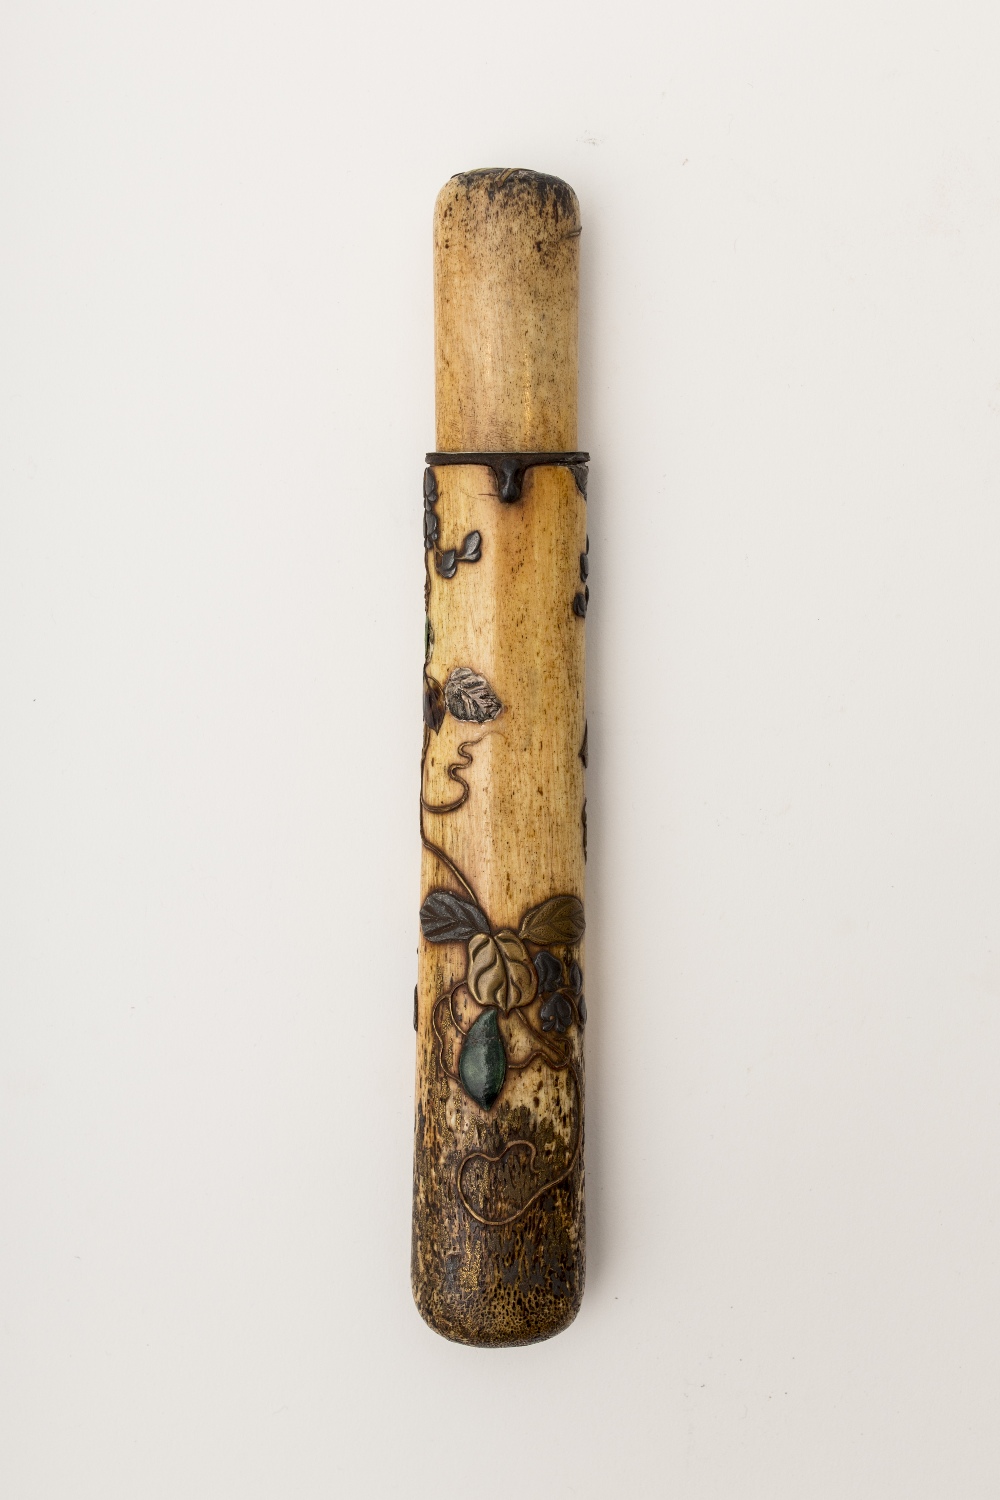 Kiseruzutsu pipe case, Japan, Meiji periodBone inlaid with metal and lacquer, decorated with - Image 2 of 2